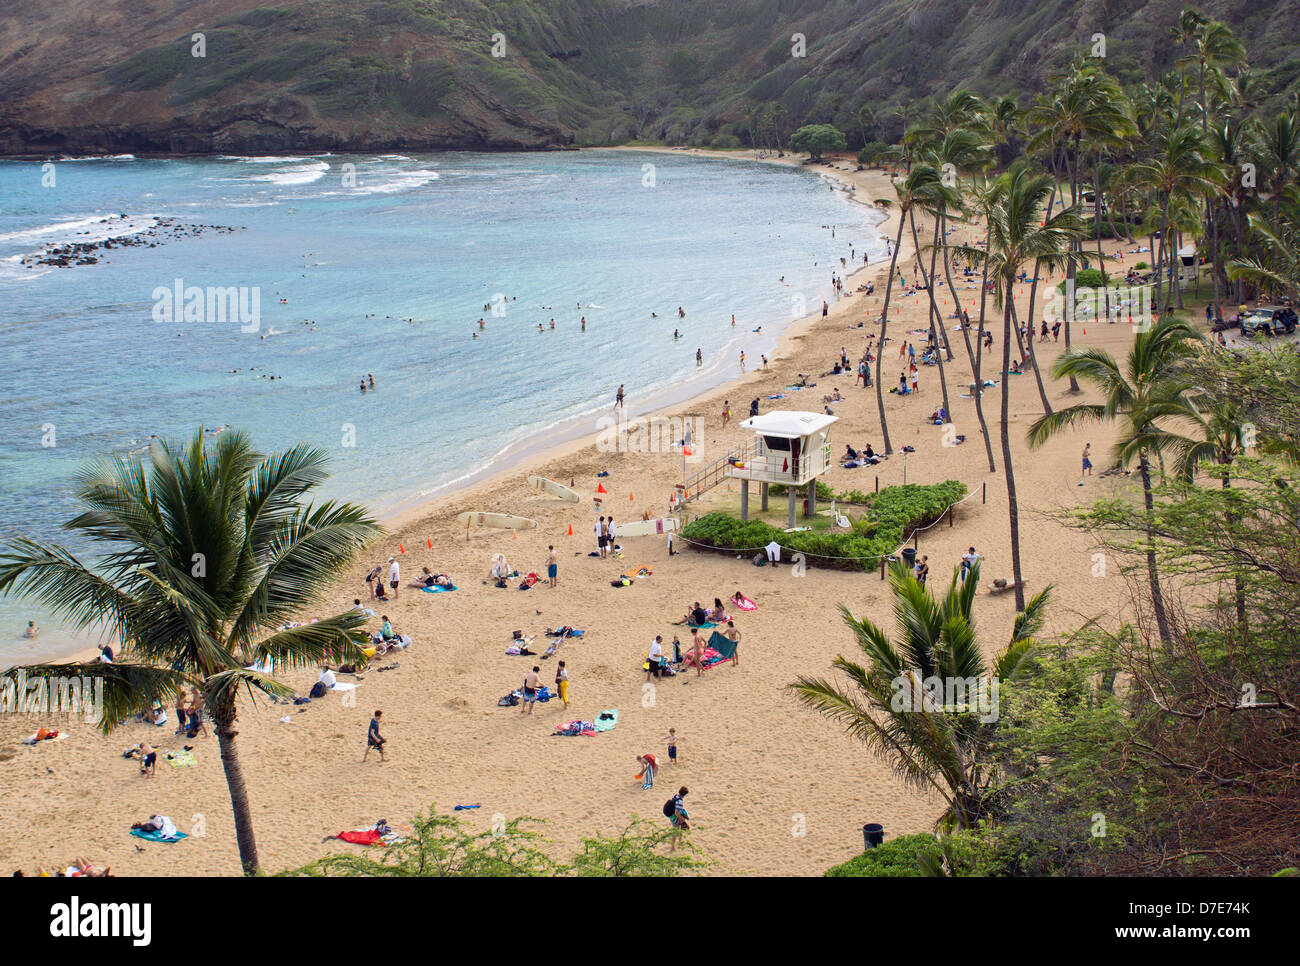 Hanauma Bay on the island of Oahu; this spot is very popular for snorkeling. Stock Photo